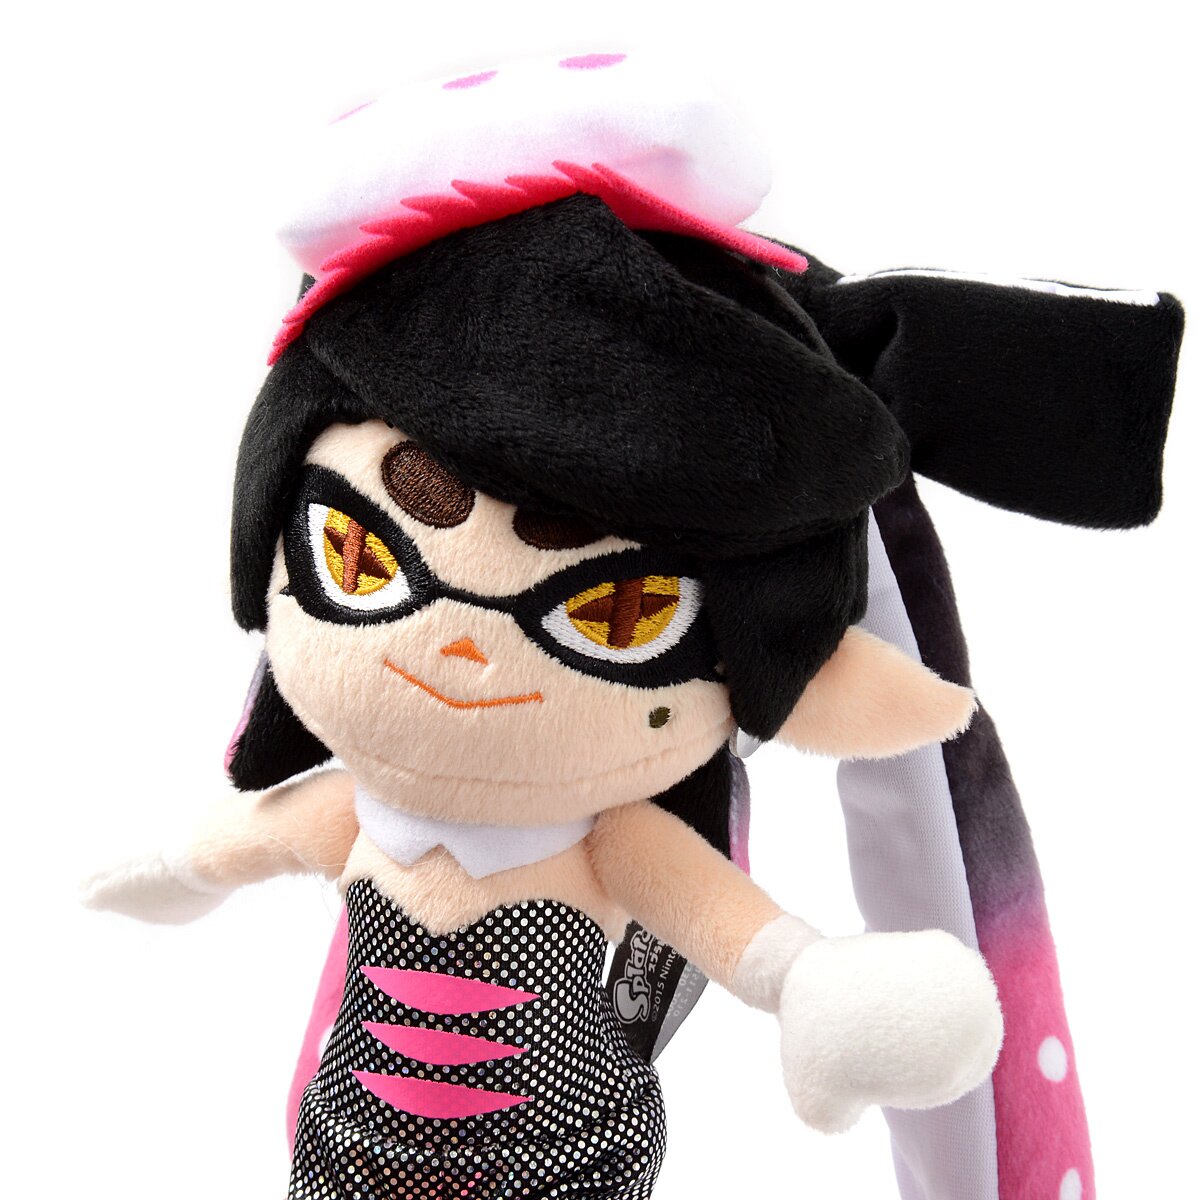 Splatoon Squid Sisters Marie Plush Doll Stuffed Toy All Star Collection 23cm